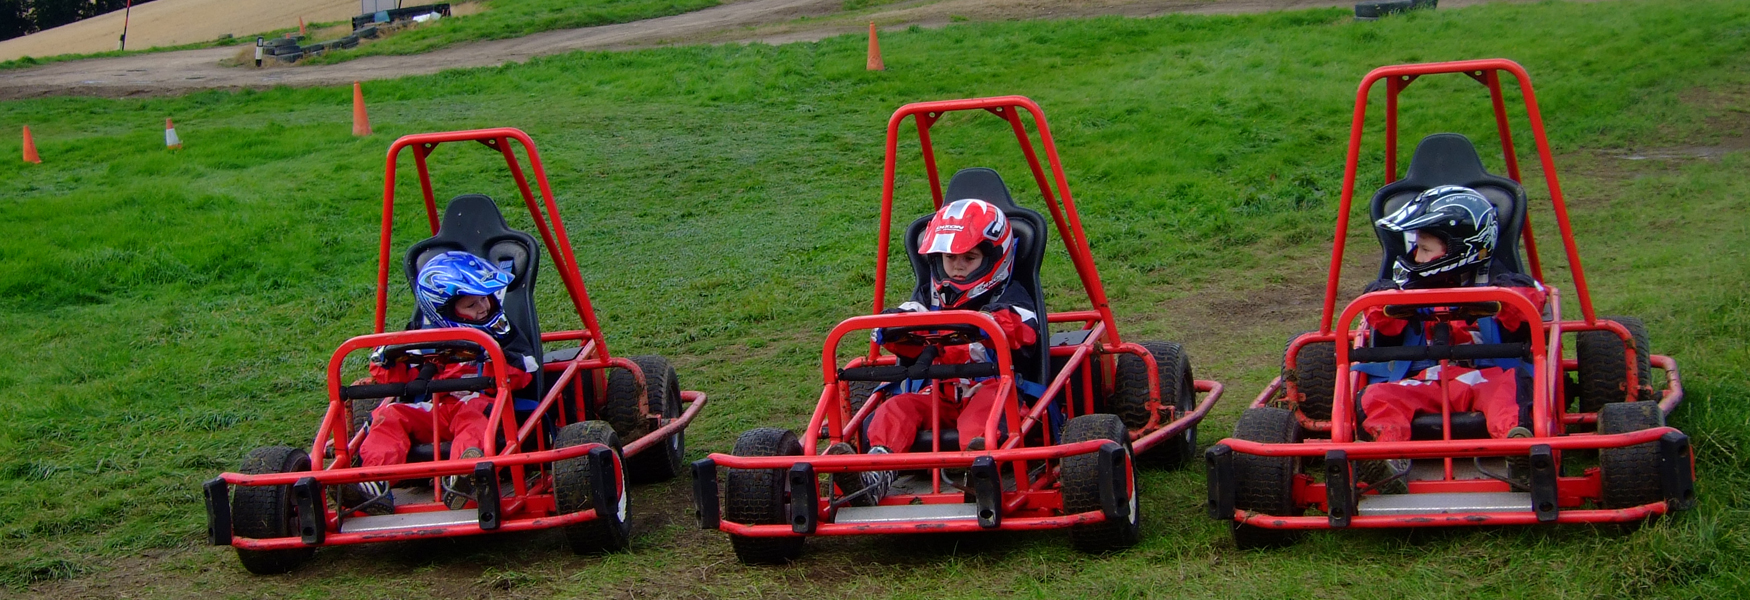 Pacer Rally Karts